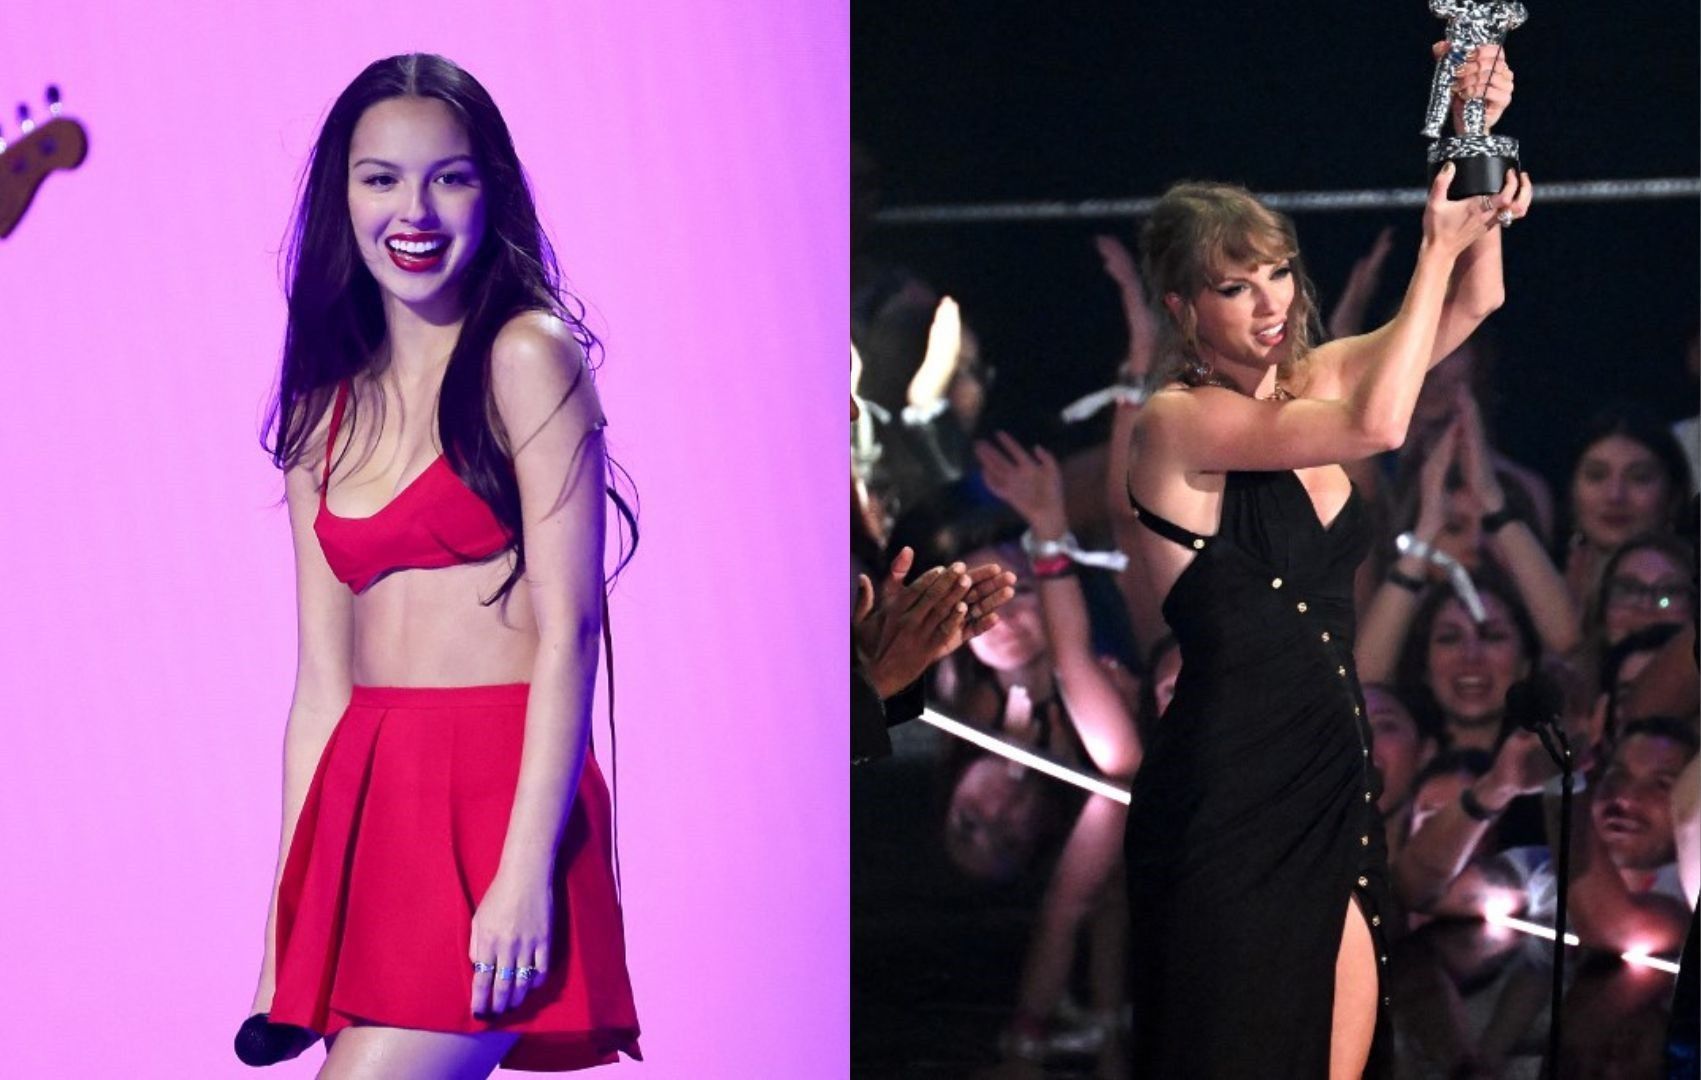 'I don't have beef with anyone': Olivia Rodrigo denies feud with Taylor Swift